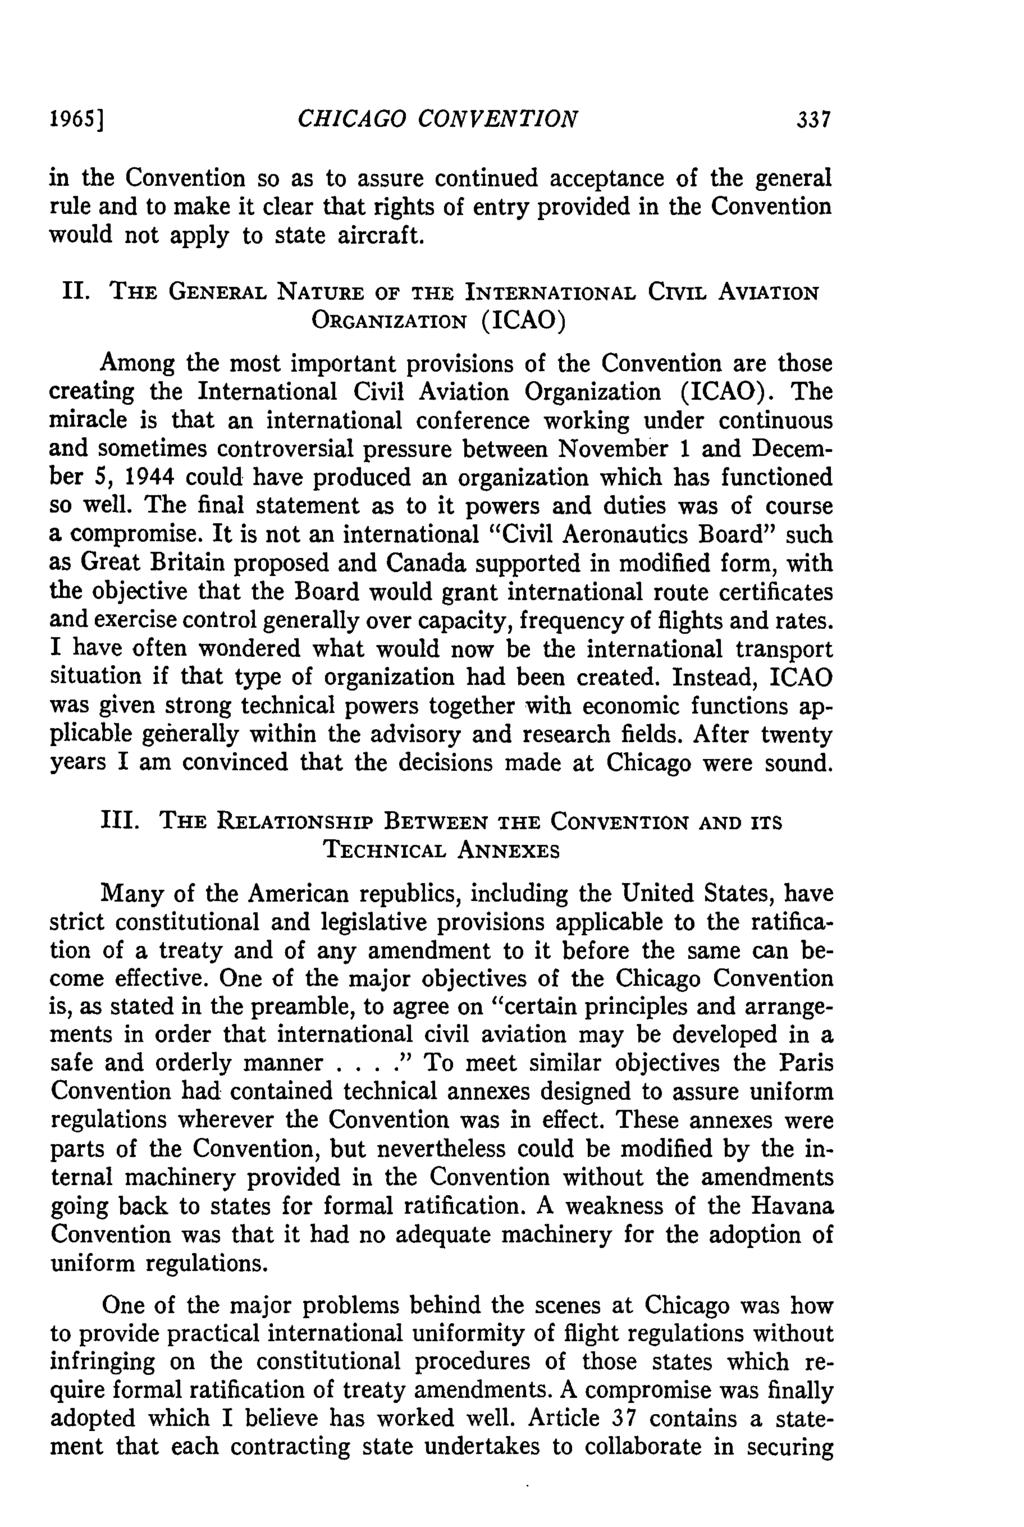 1965] CHICAGO CONVENTION in the Convention so as to assure continued acceptance of the general rule and to make it clear that rights of entry provided in the Convention would not apply to state